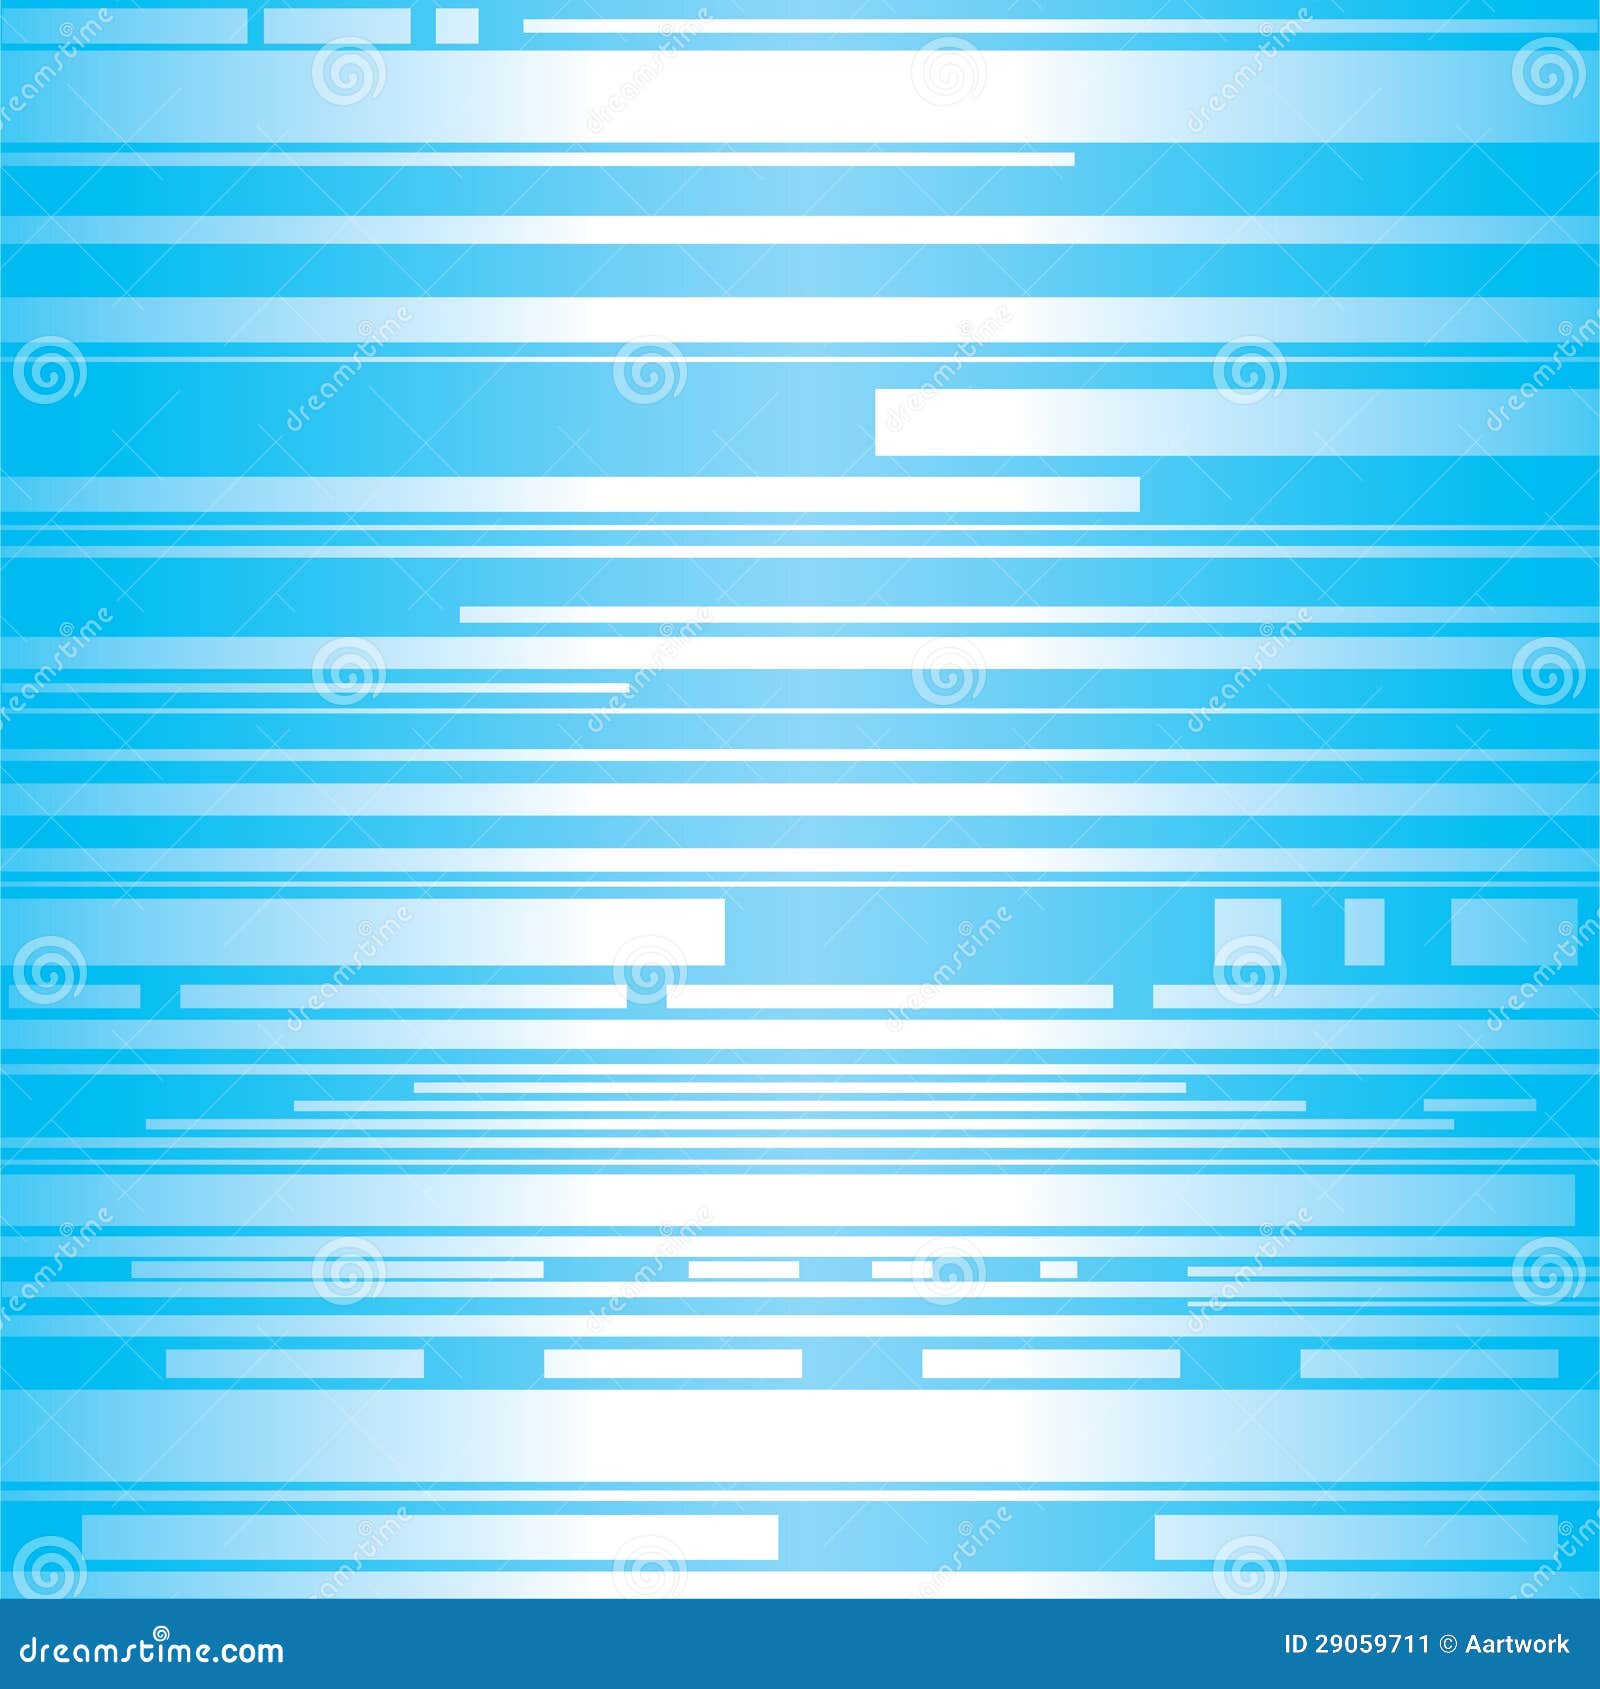 White Strip In Blue Background Stock Vector - Illustration of cover